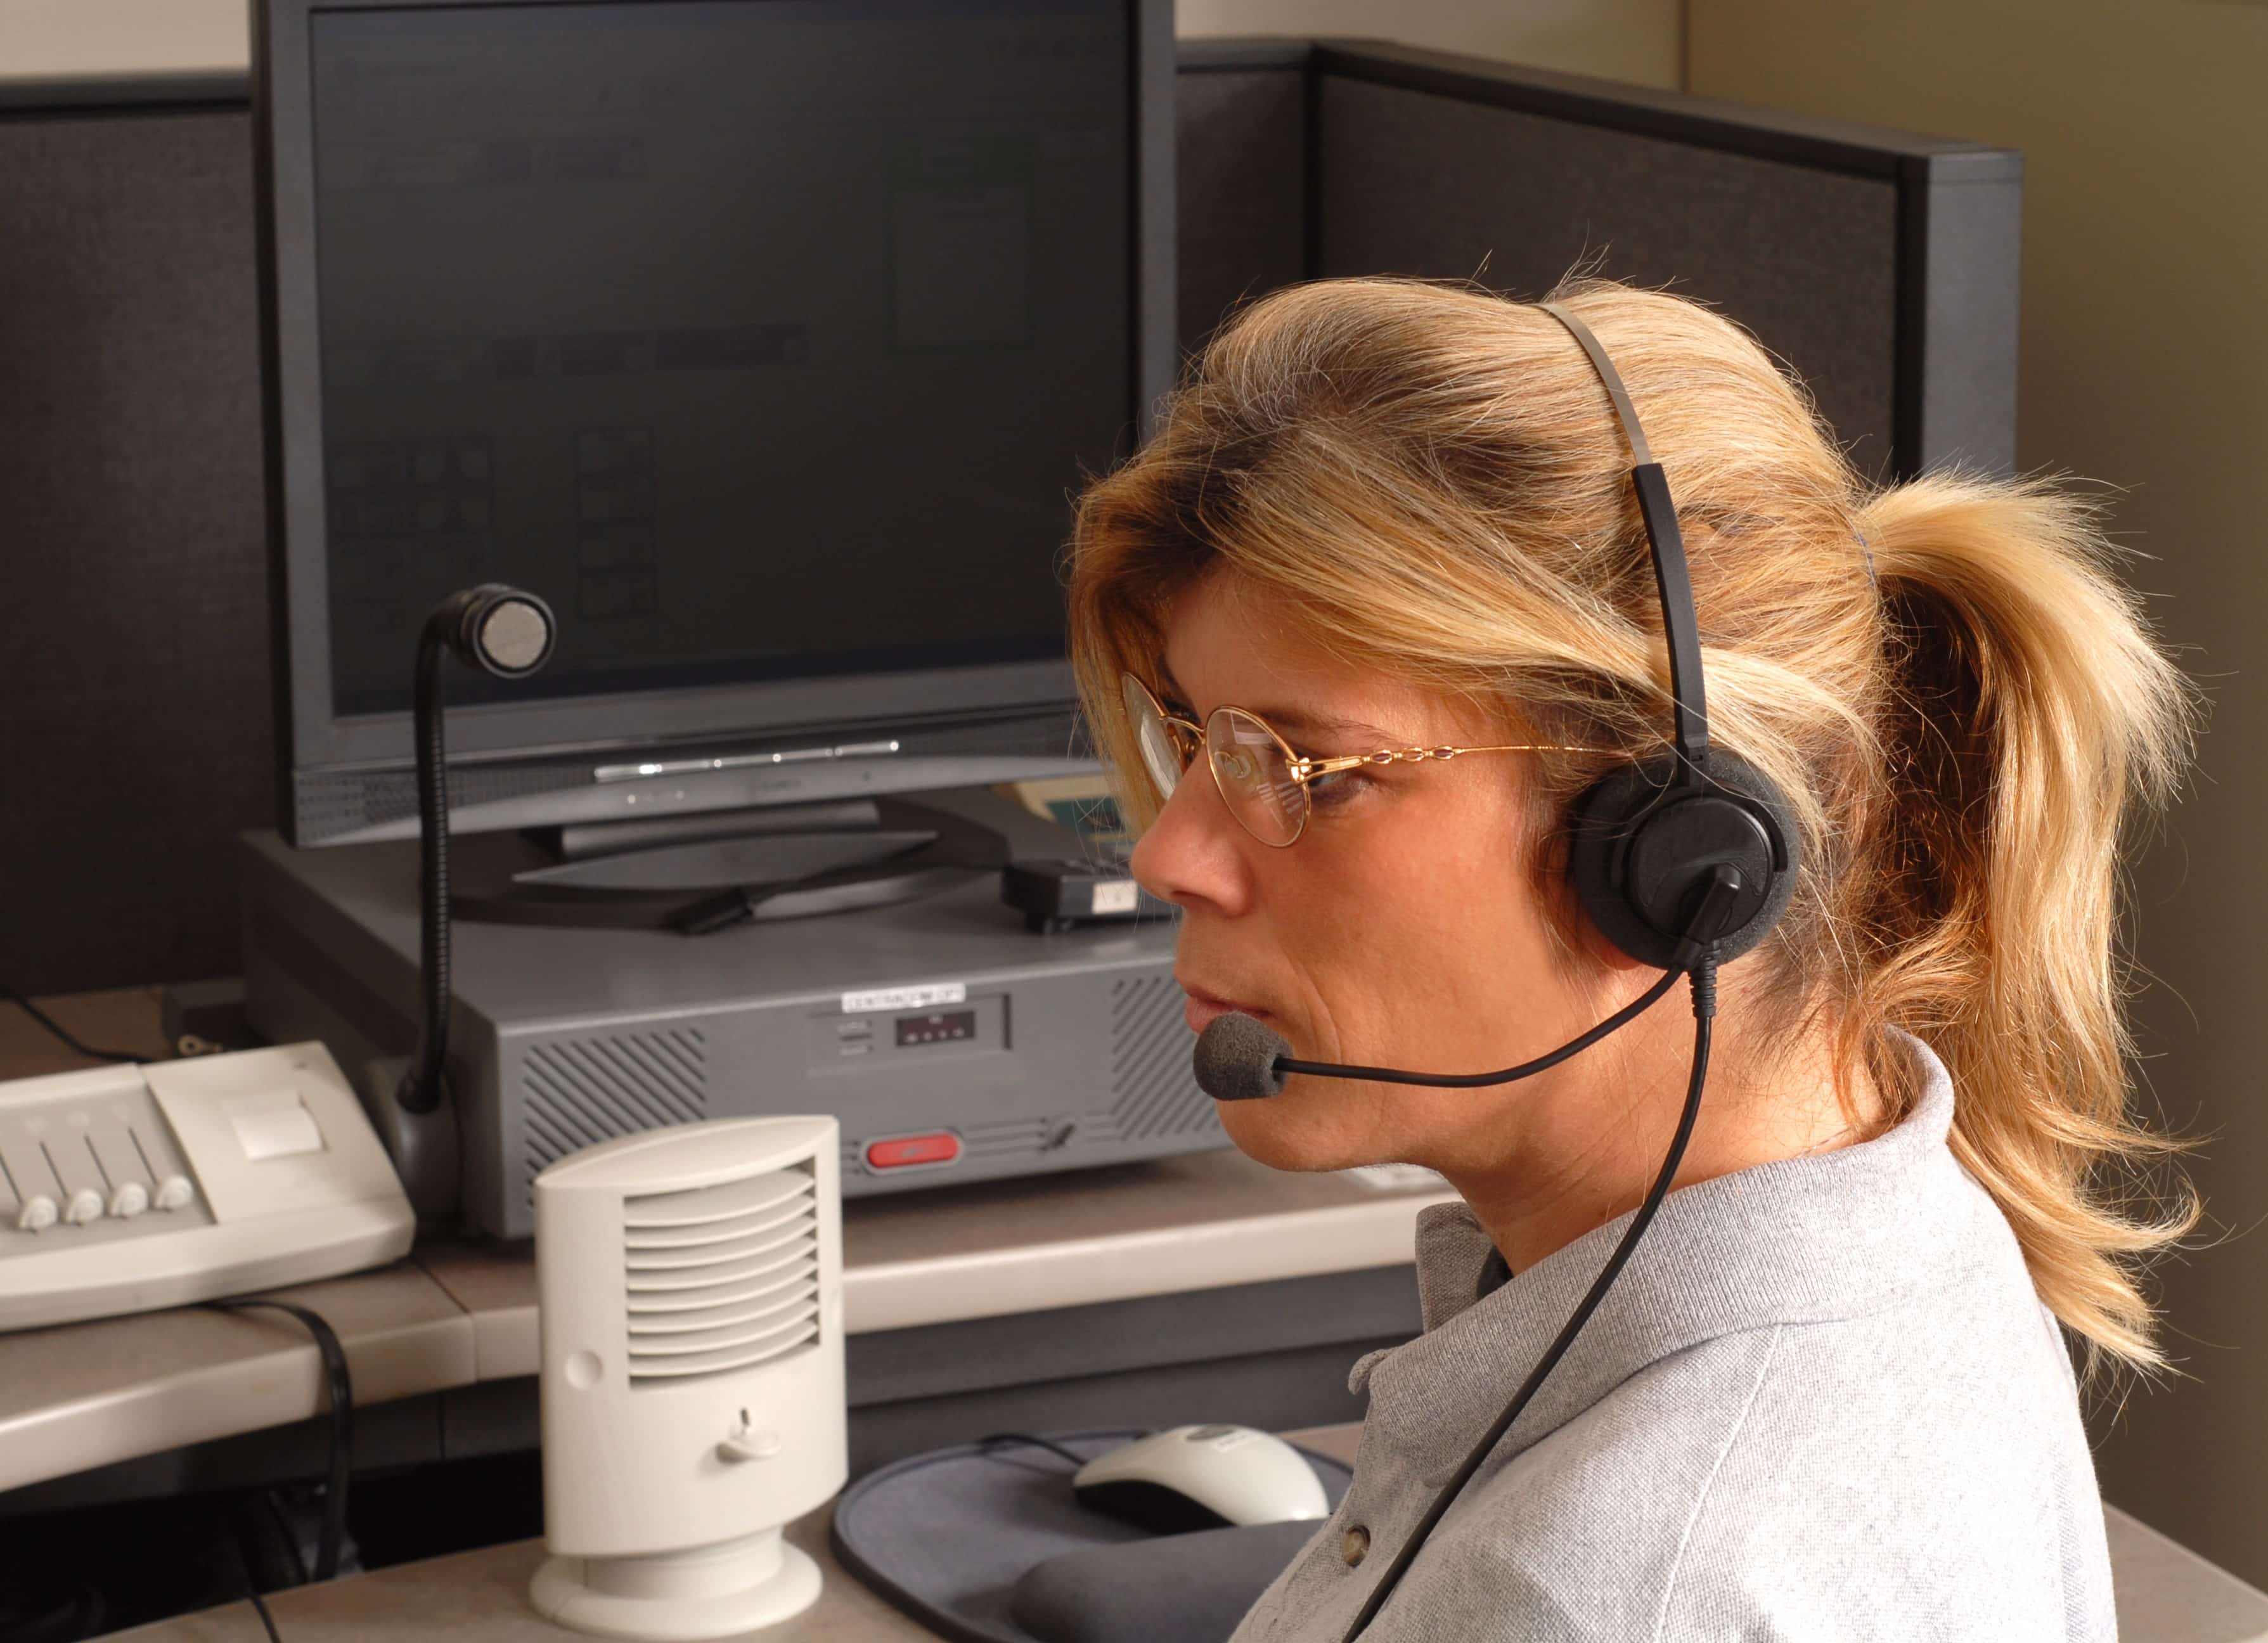 Police dispatcher with a headset on